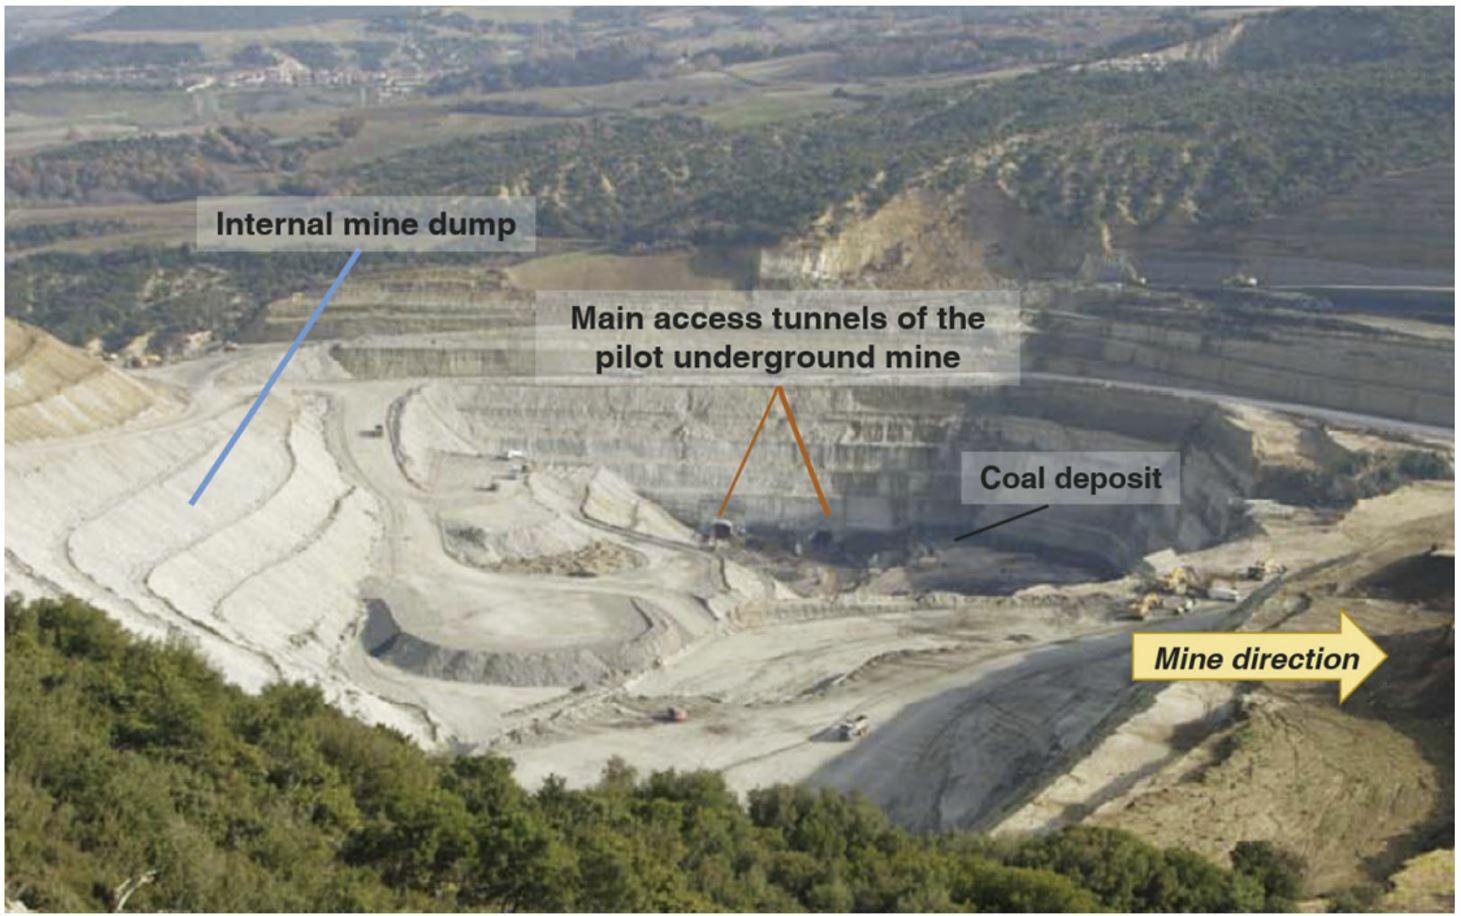 The image shows a view of the Prosilio coal mine in Greece